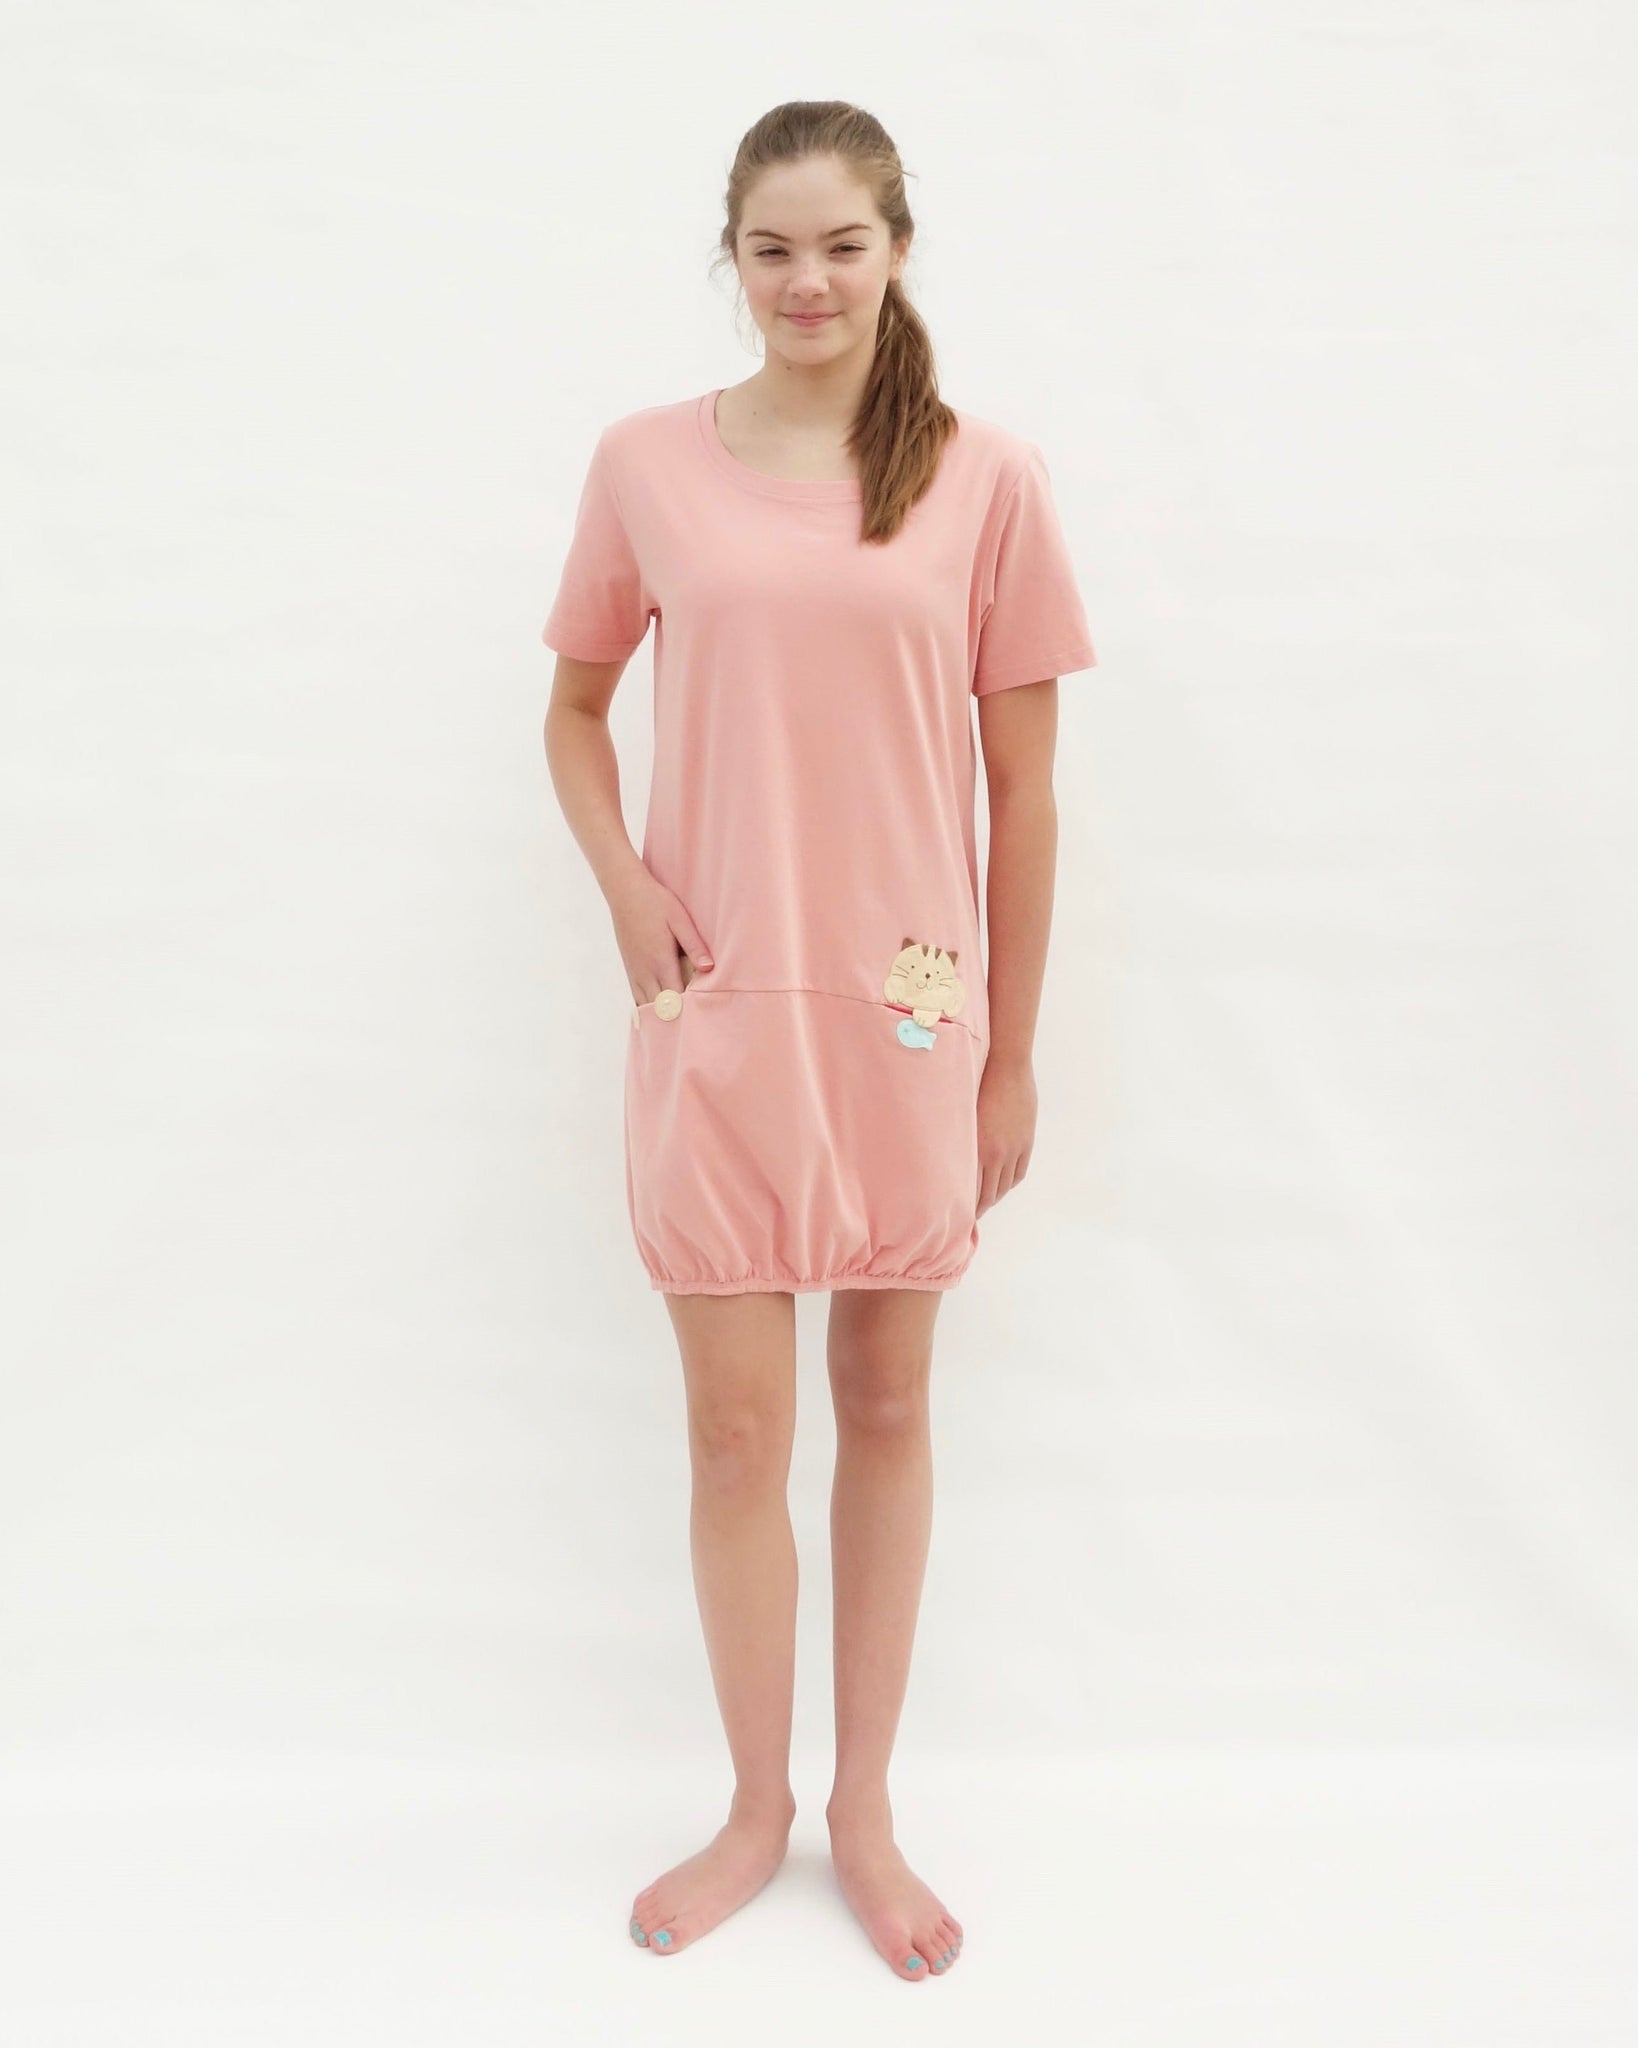 Woman wearing cat t-shirt dress in pink with cat appliqué, embroidery, front pockets, round neck opening, short sleeves, in front view.